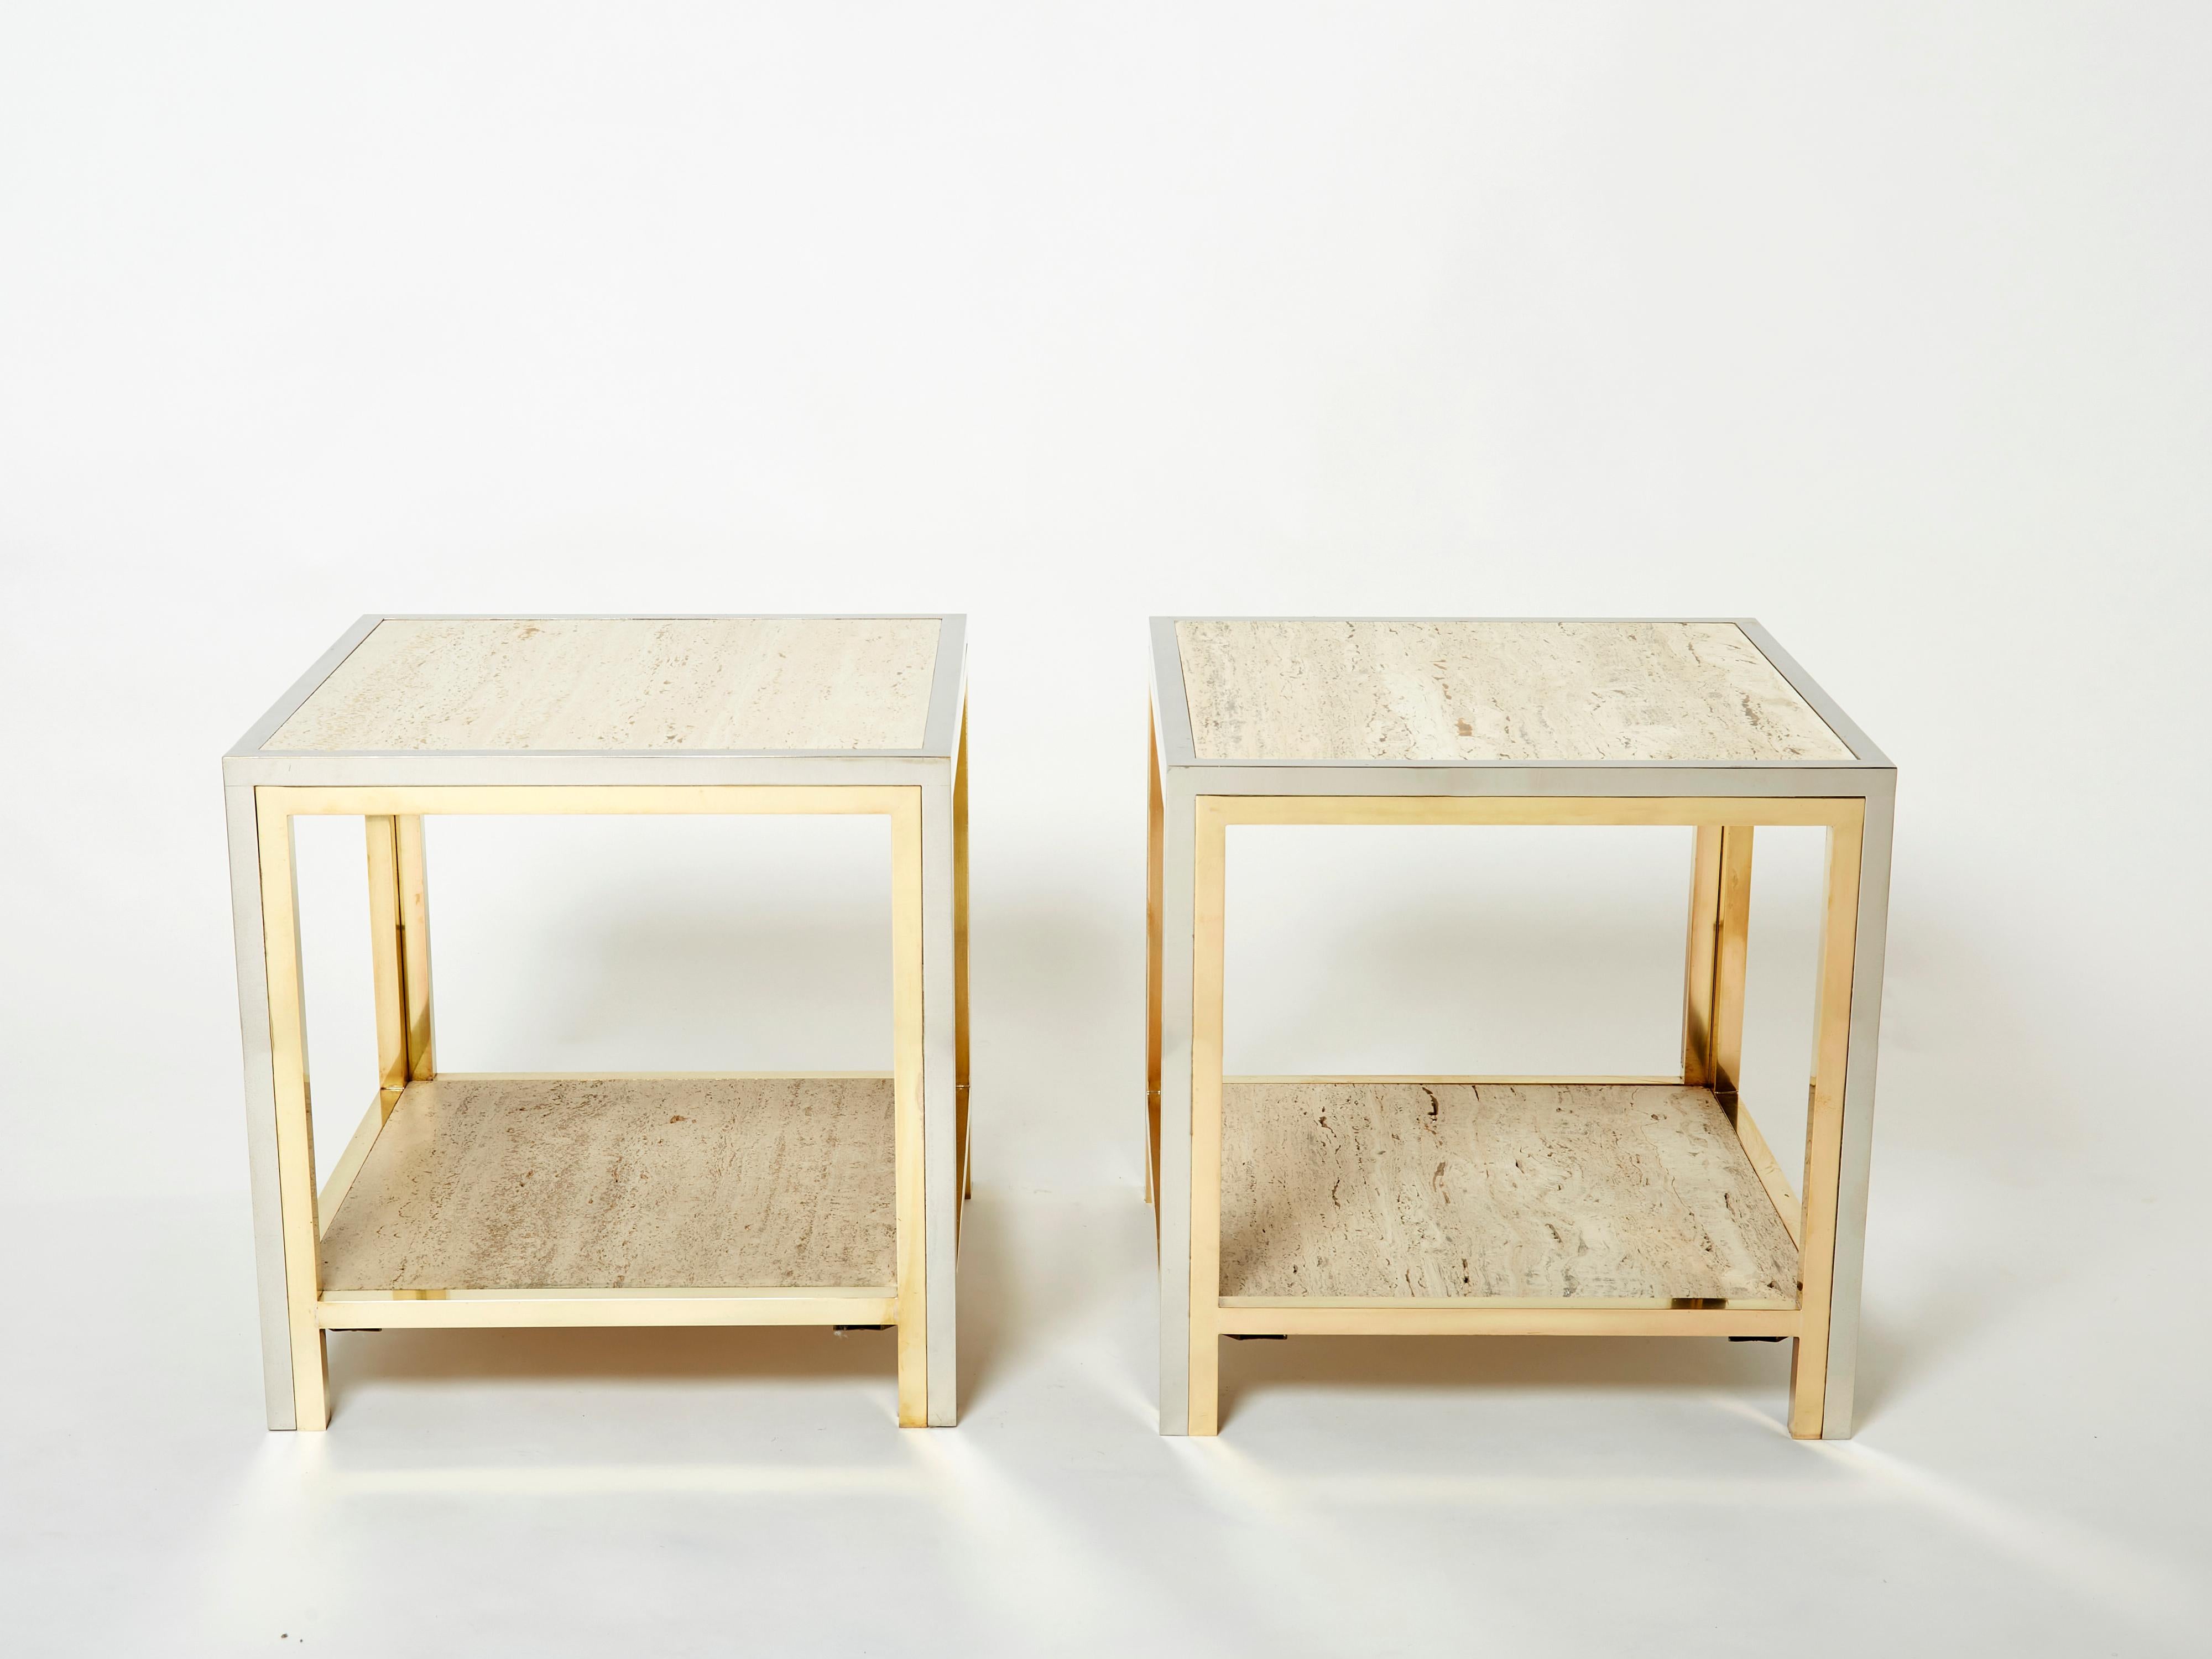 A beautiful piece of design, this pair of two-tier end tables or side tables will be the focal point of your living room. Symmetrical brass and chrome elements match perfectly with the travertine tops, the result being impressively sleek decorative